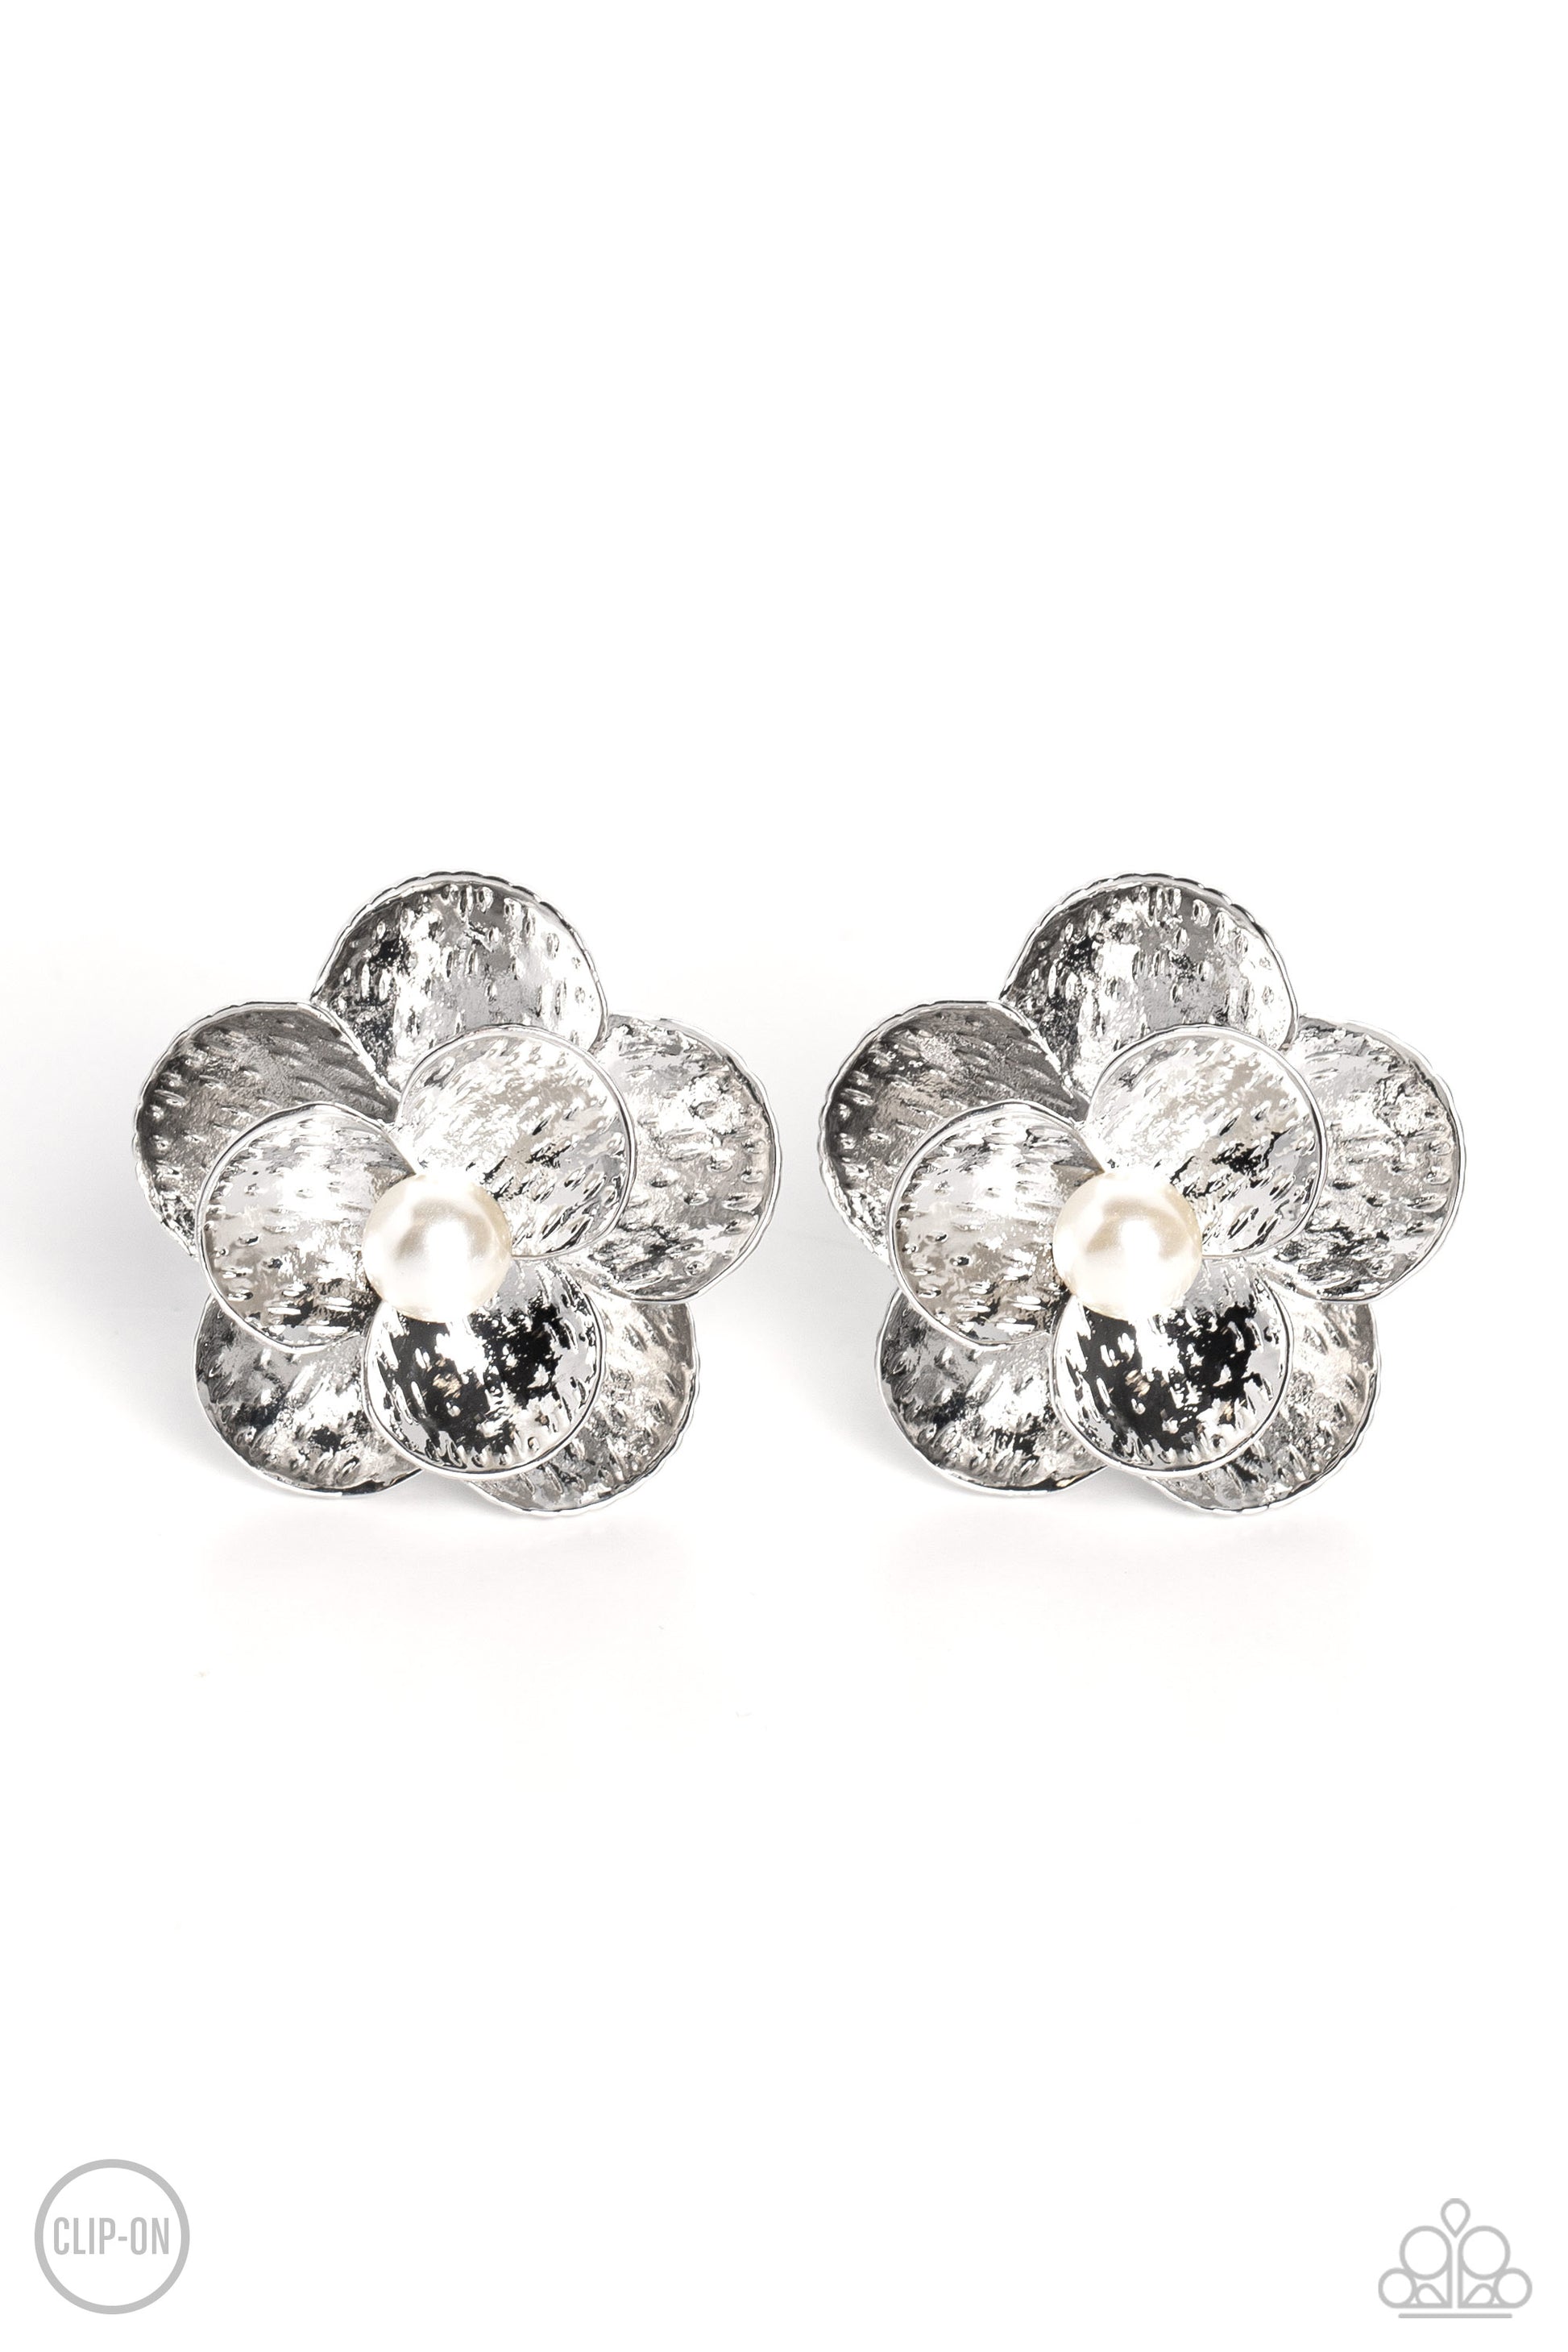 Miami Magic White Clip-On Earring - Paparazzi Accessories  Flaring out from a white pearl center, silver flowers, featuring studded petals, grace the ear. An oversized silver flower, featuring the same studded design as the smaller flower, creates the 3D design and draws additional attention to the whimsical design. Earring attaches to a standard clip-on fitting.  Sold as one pair of clip-on earrings.  P5CO-WTXX-141XX